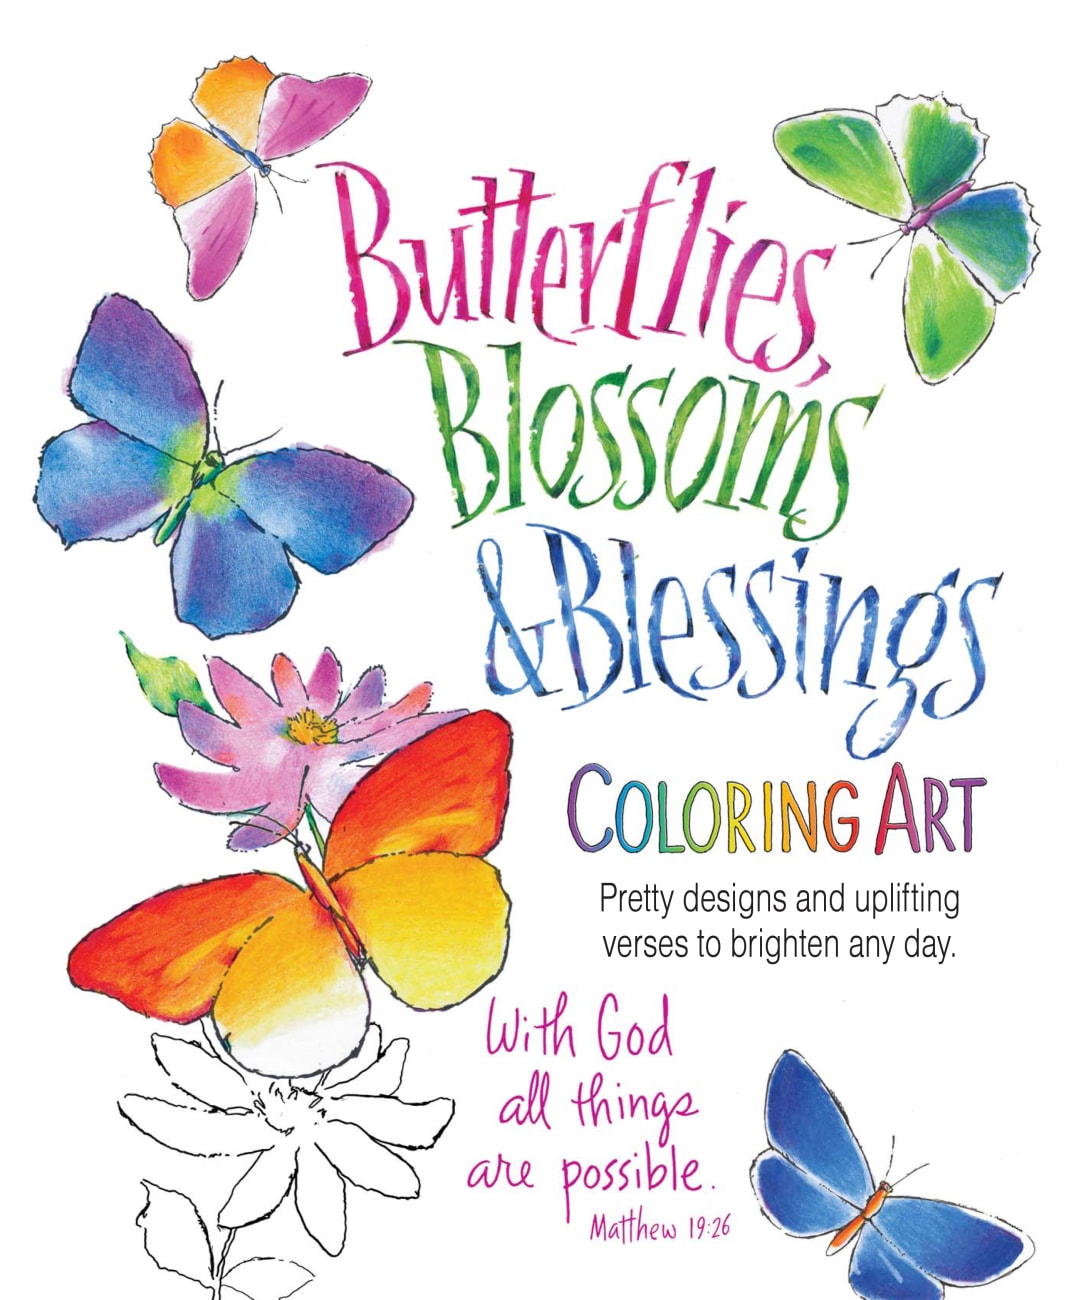 Butterflies, Blossoms & Blessings Coloring Art: Pretty Designs and Uplifting Verses to Brighten Any Day (Adult Coloring Books Series) Paperback